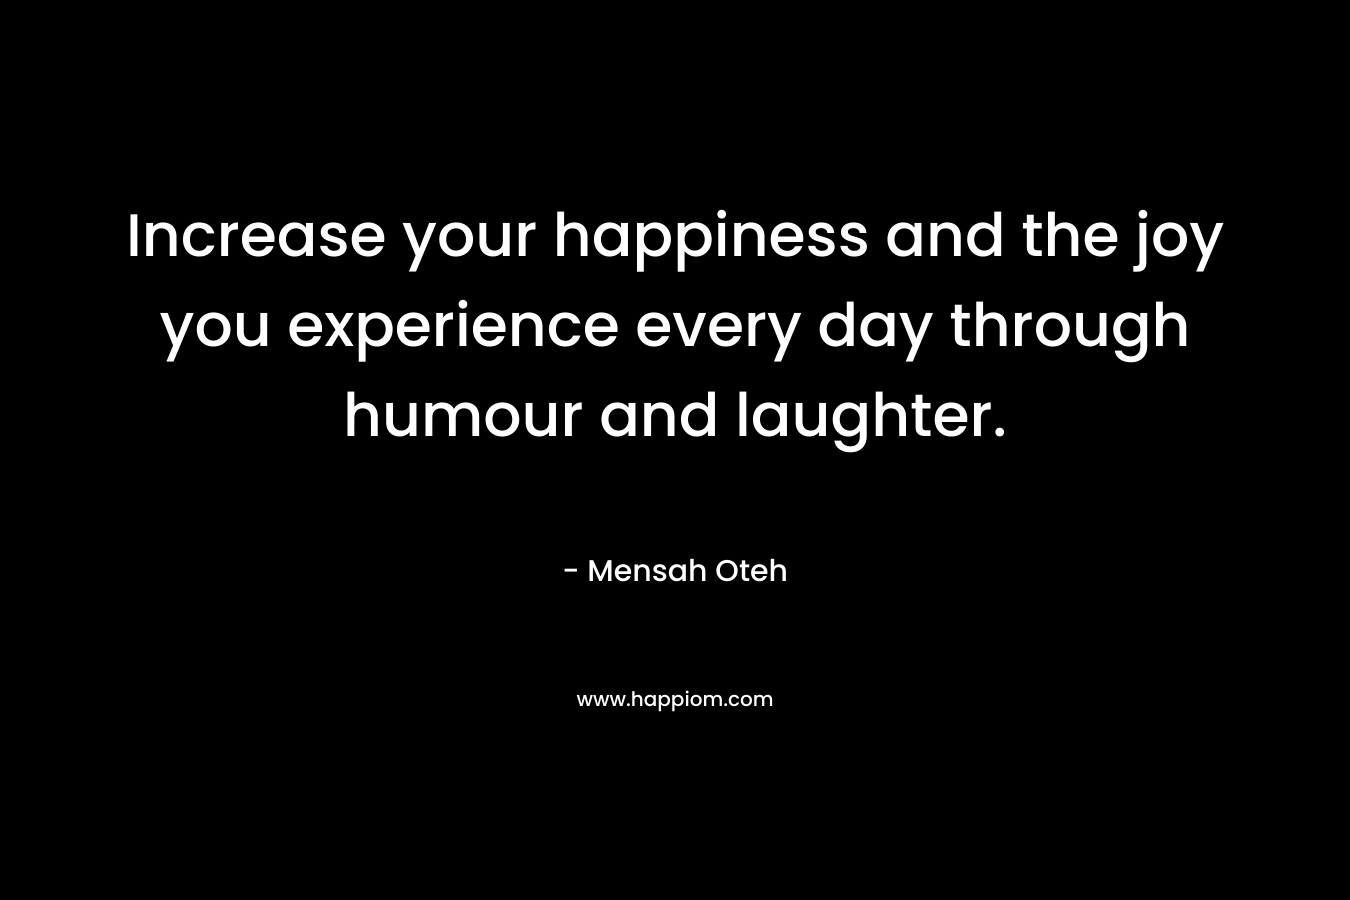 Increase your happiness and the joy you experience every day through humour and laughter.